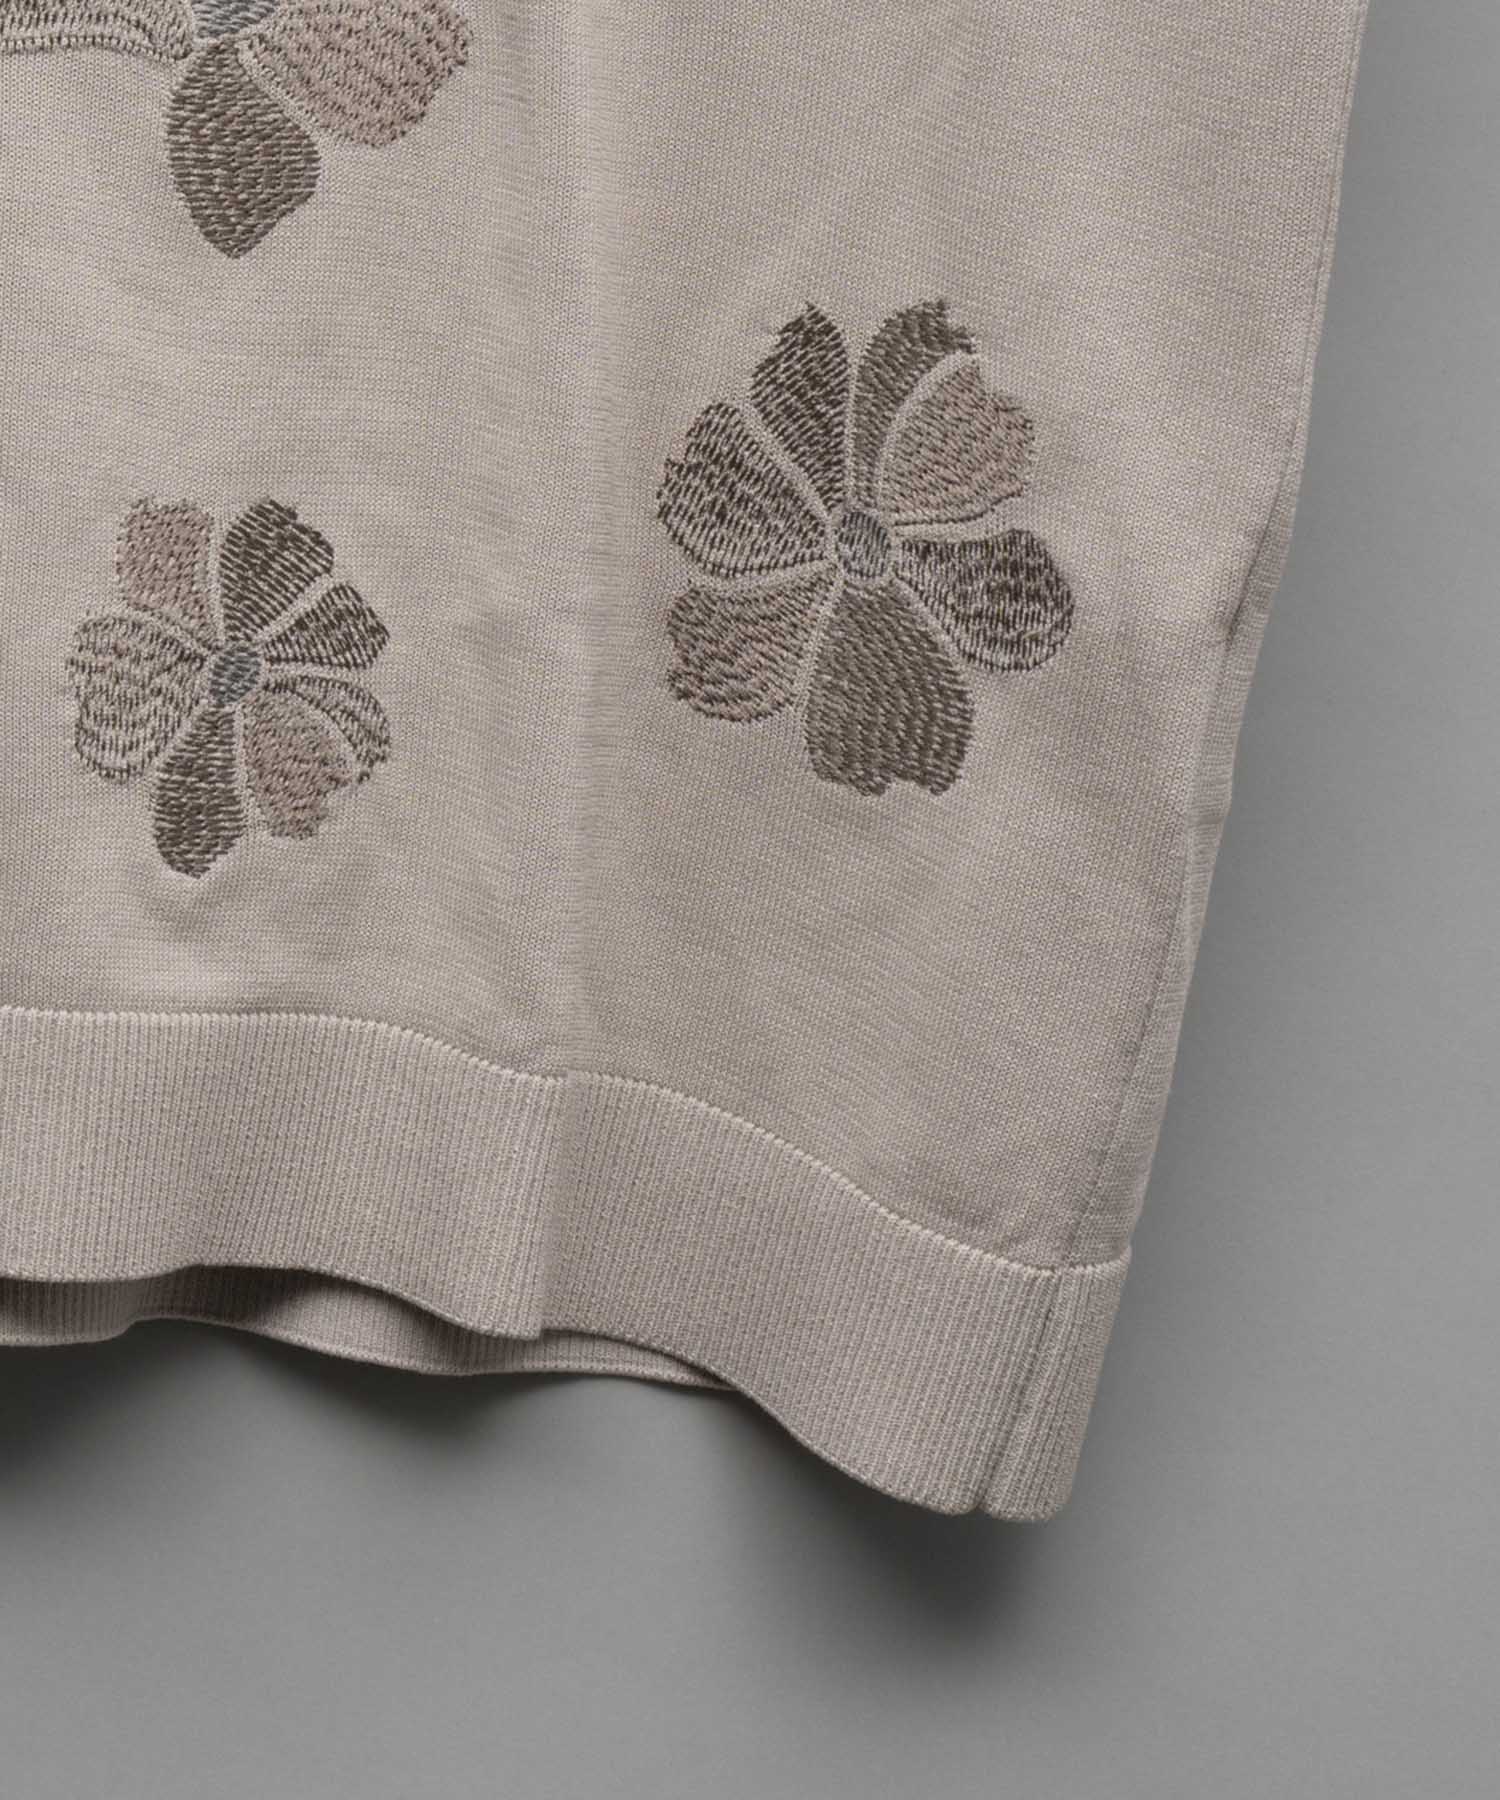 Flower Embroidery Prime-Over Short Sleeve Knit Shirt